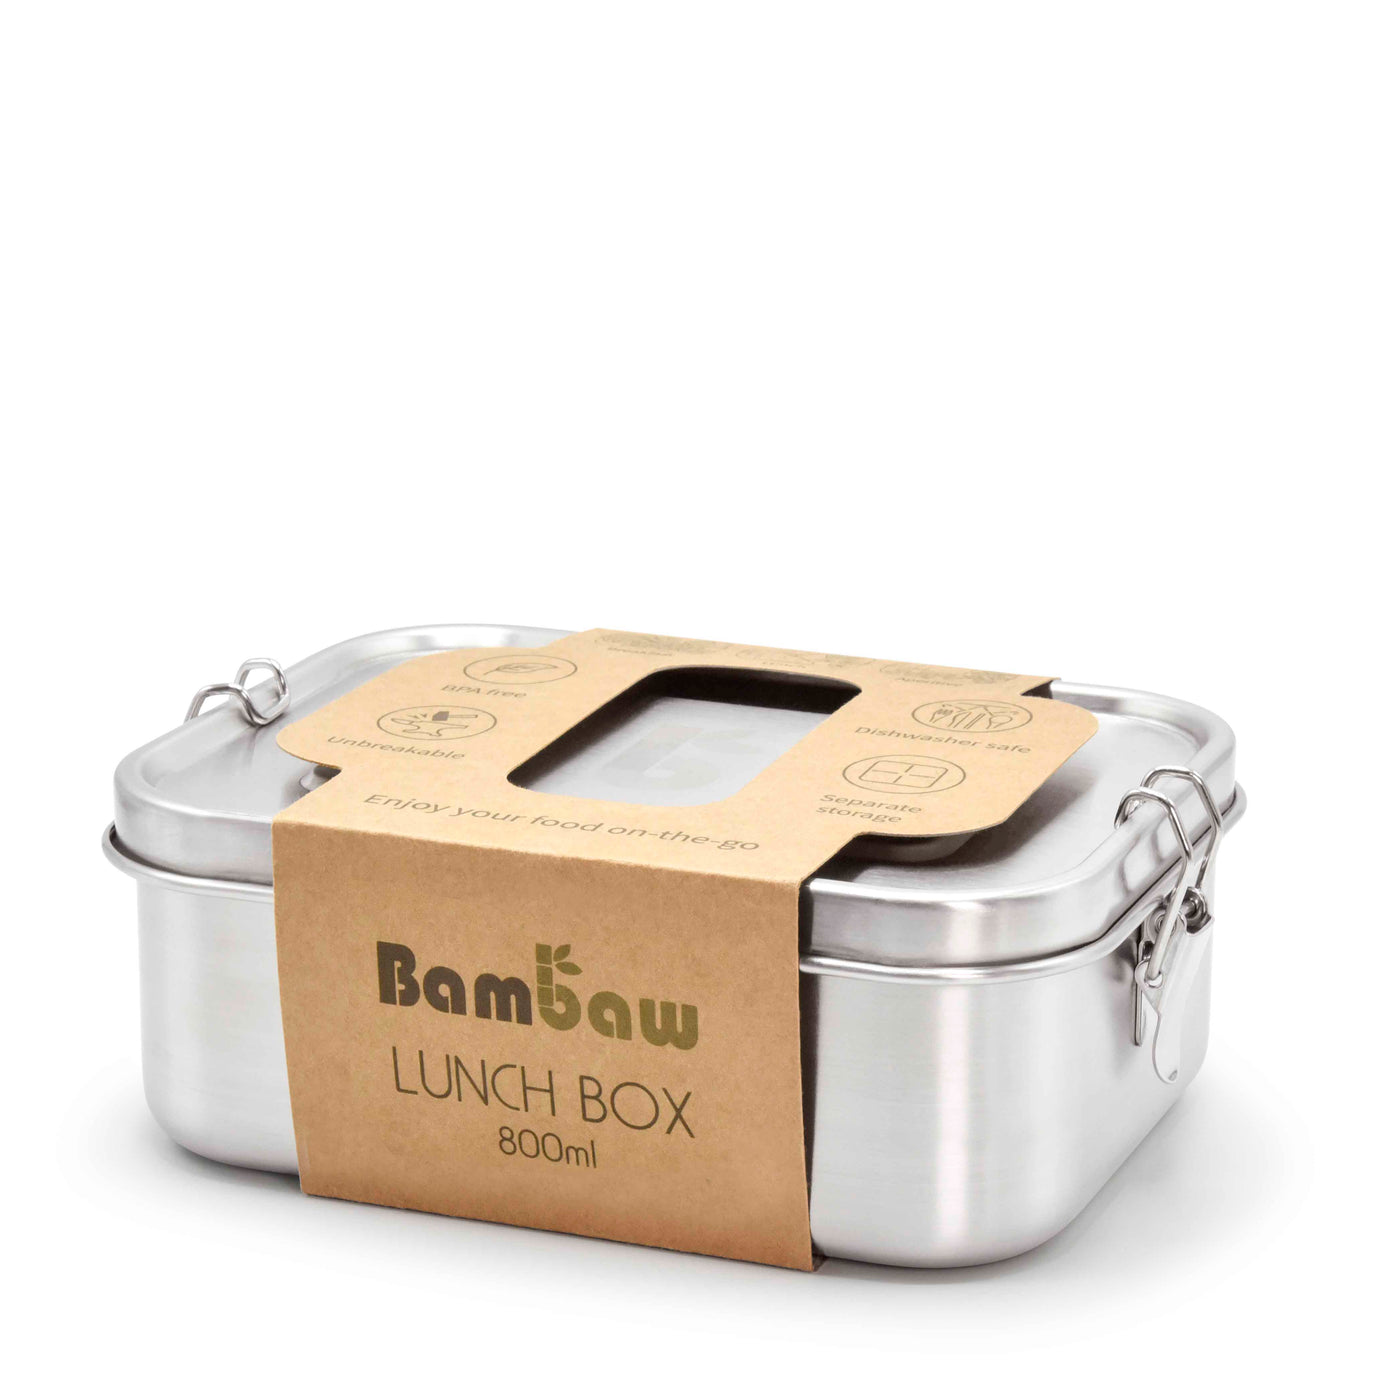 Bambaw Stainless Steel Food Container - 800ml